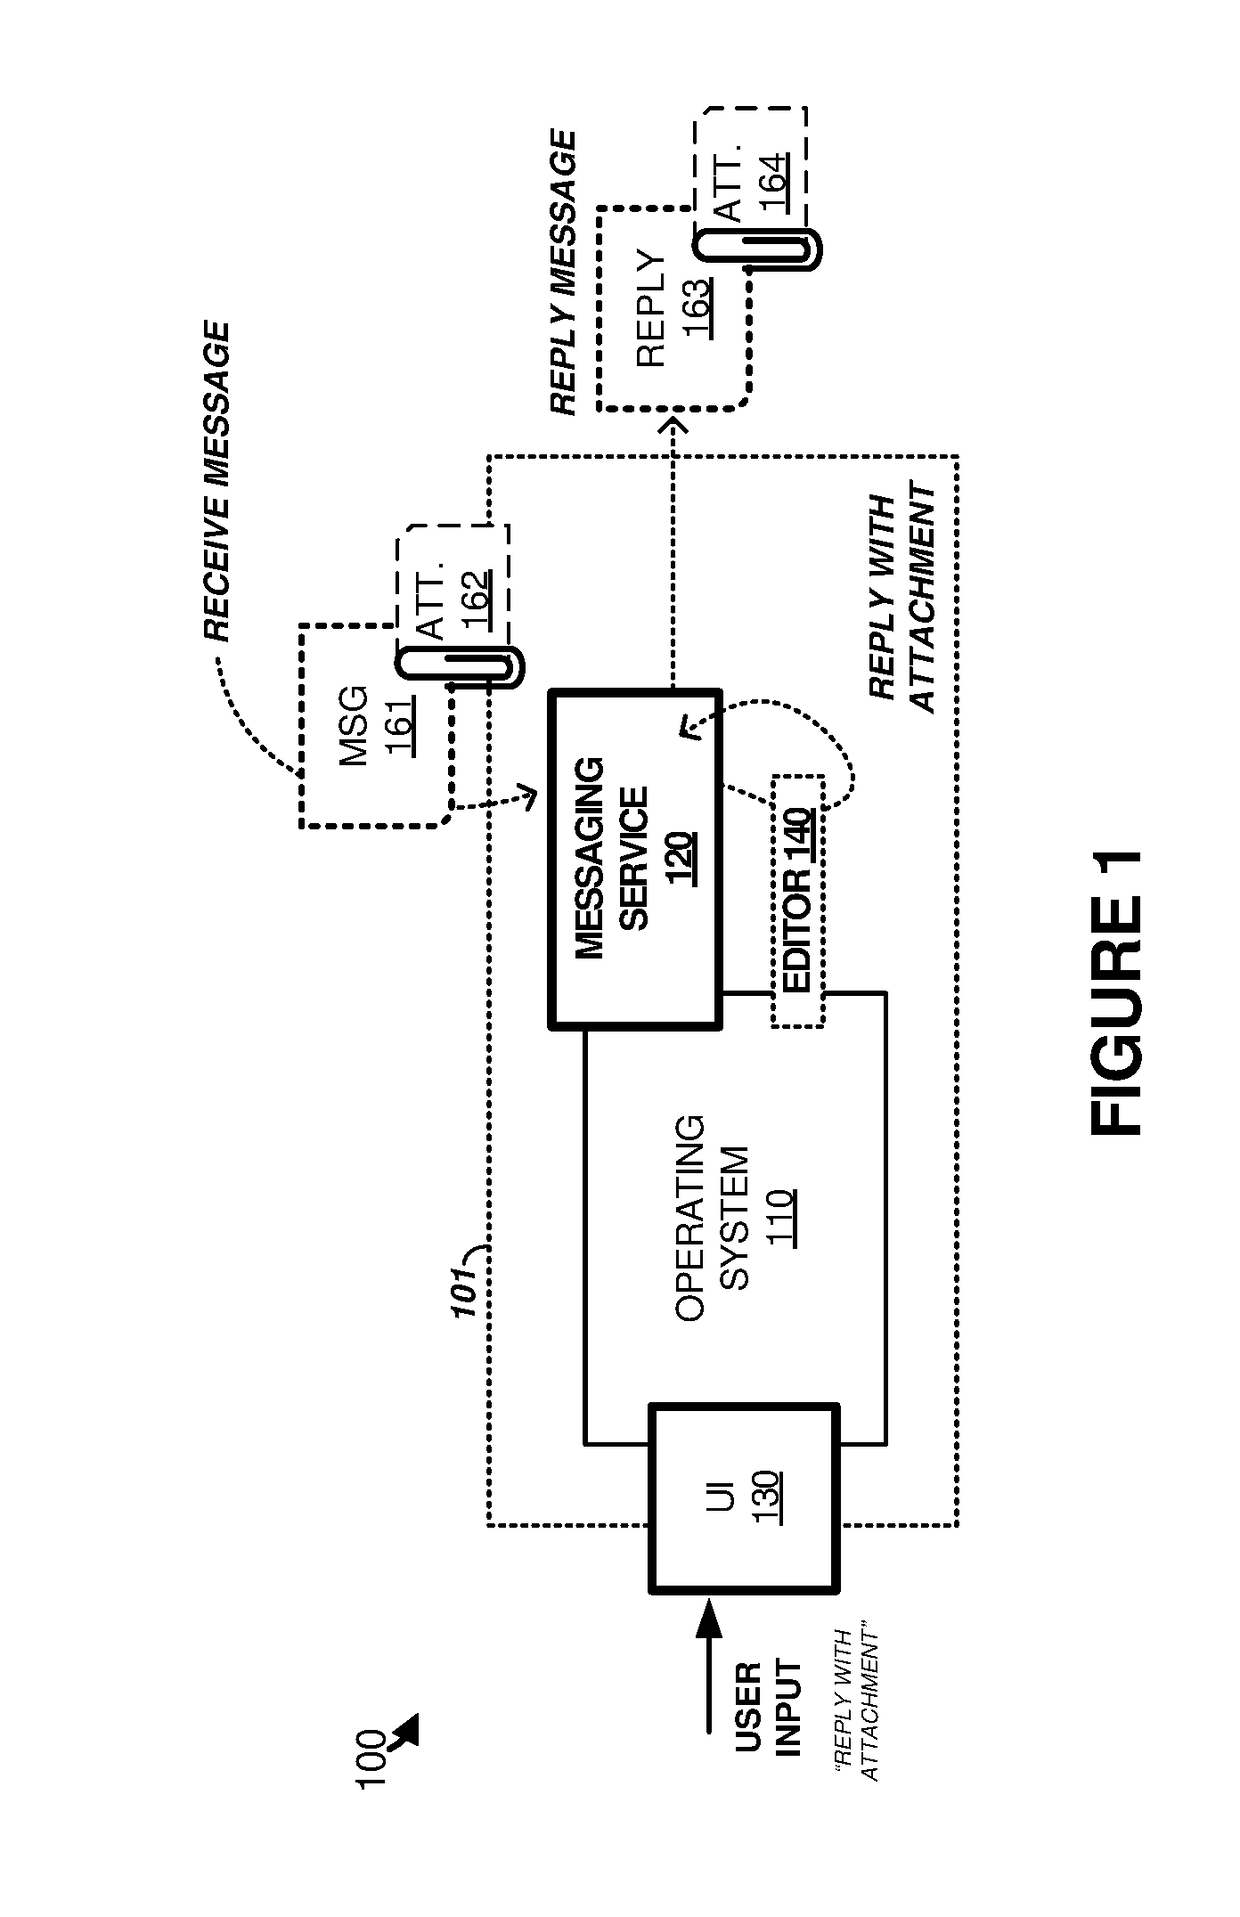 Attachment reply handling in networked messaging systems